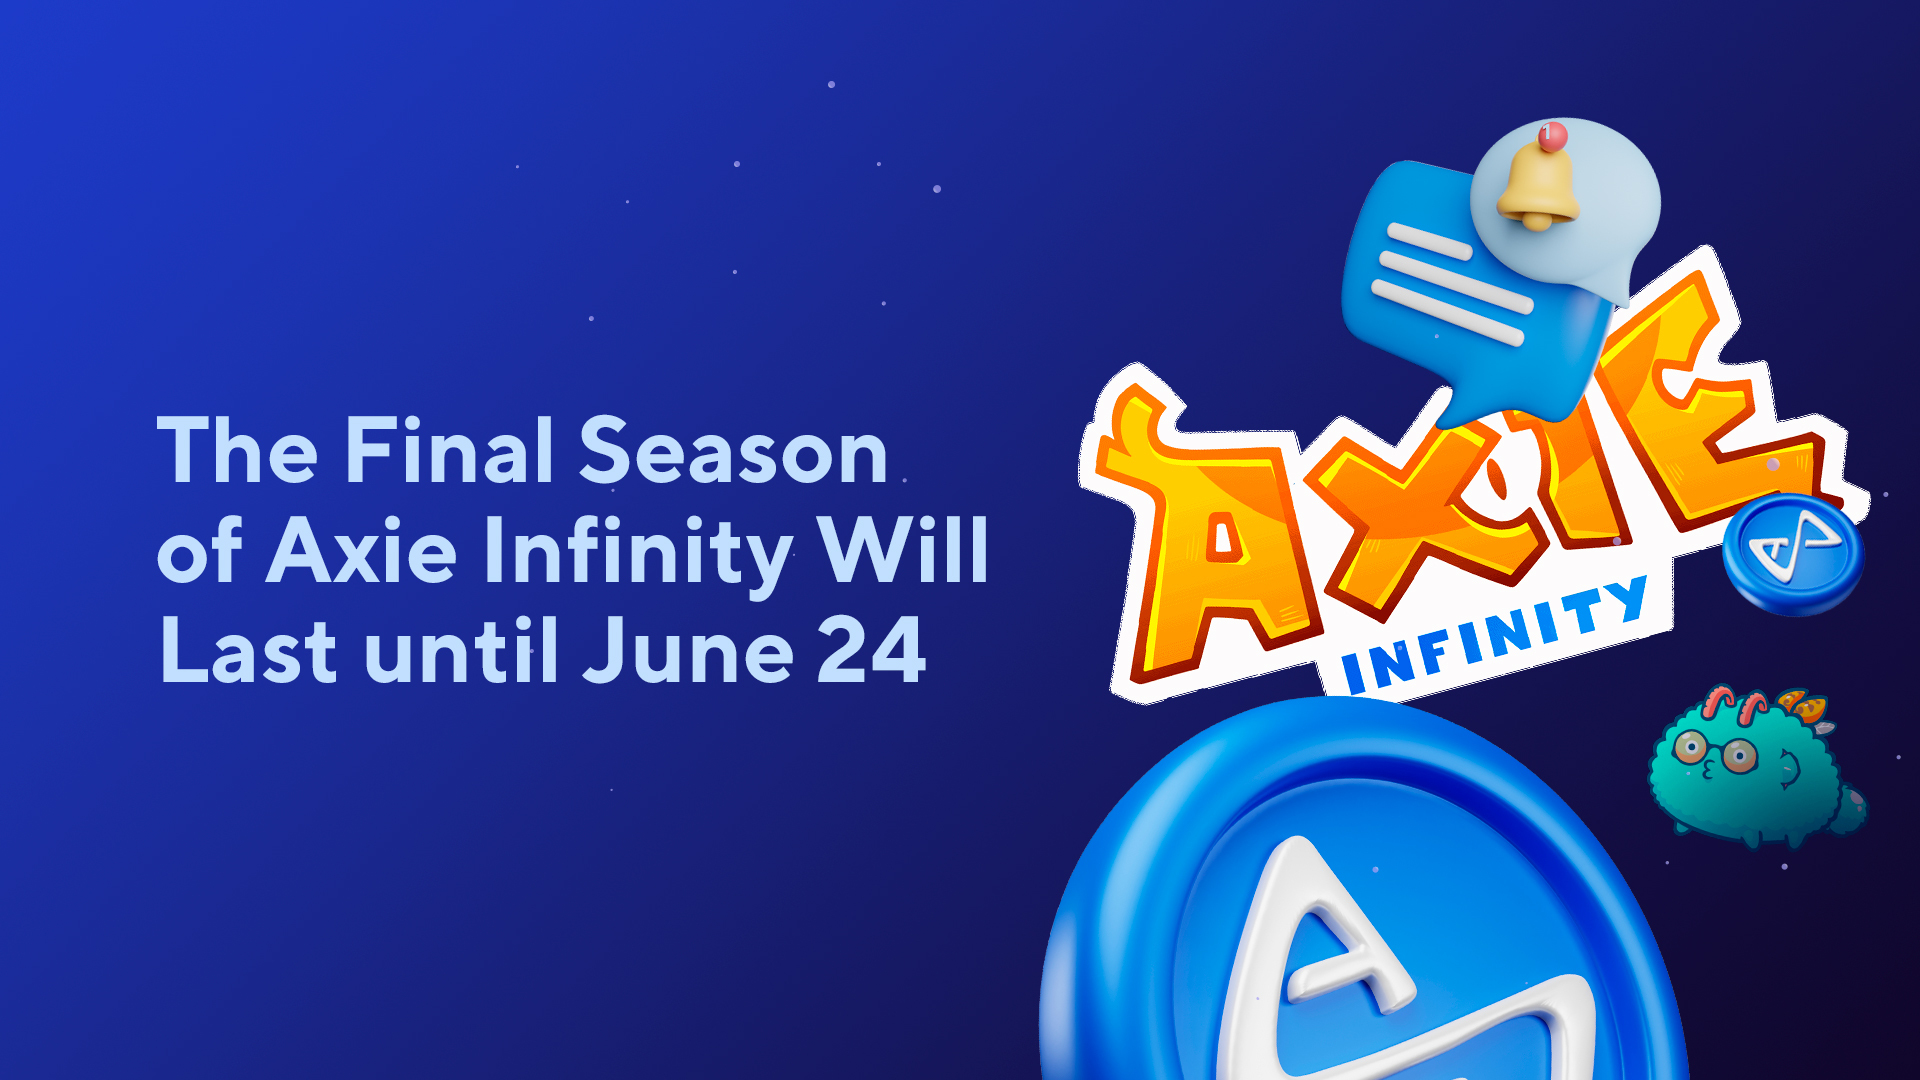 The Final Season of Axie Infinity Will Last Until June 24